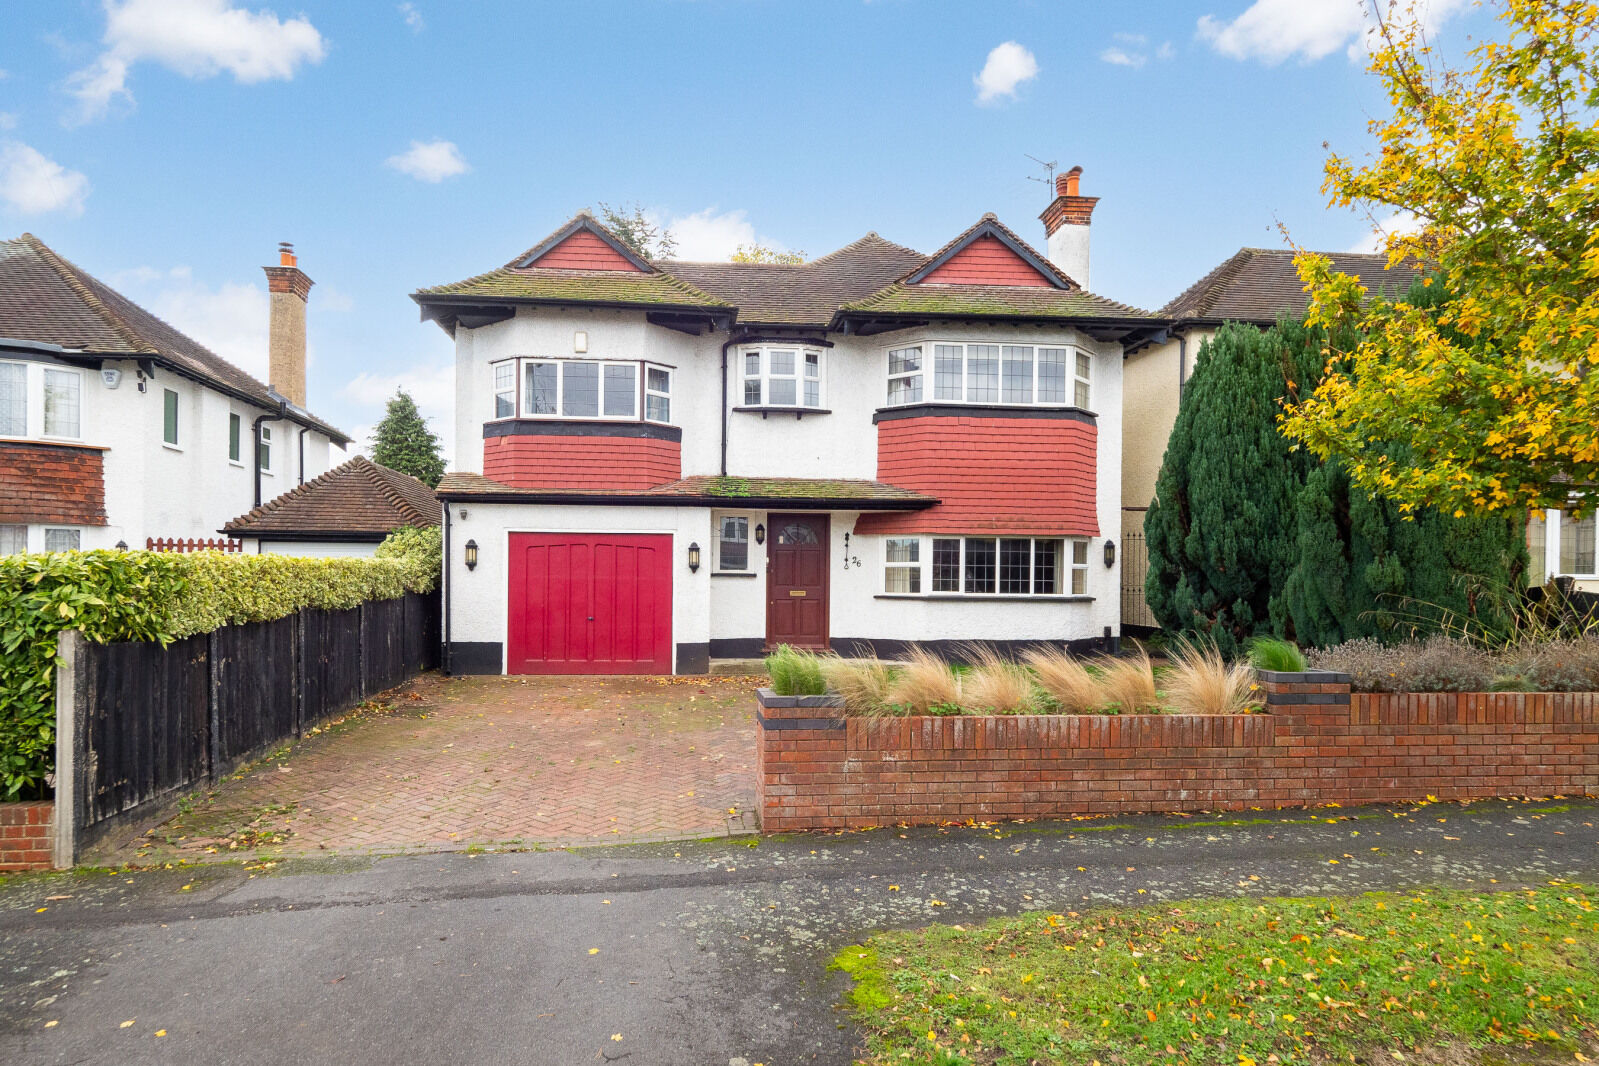 5 bedroom detached house for sale Arundel Road, Cheam, SM2, main image